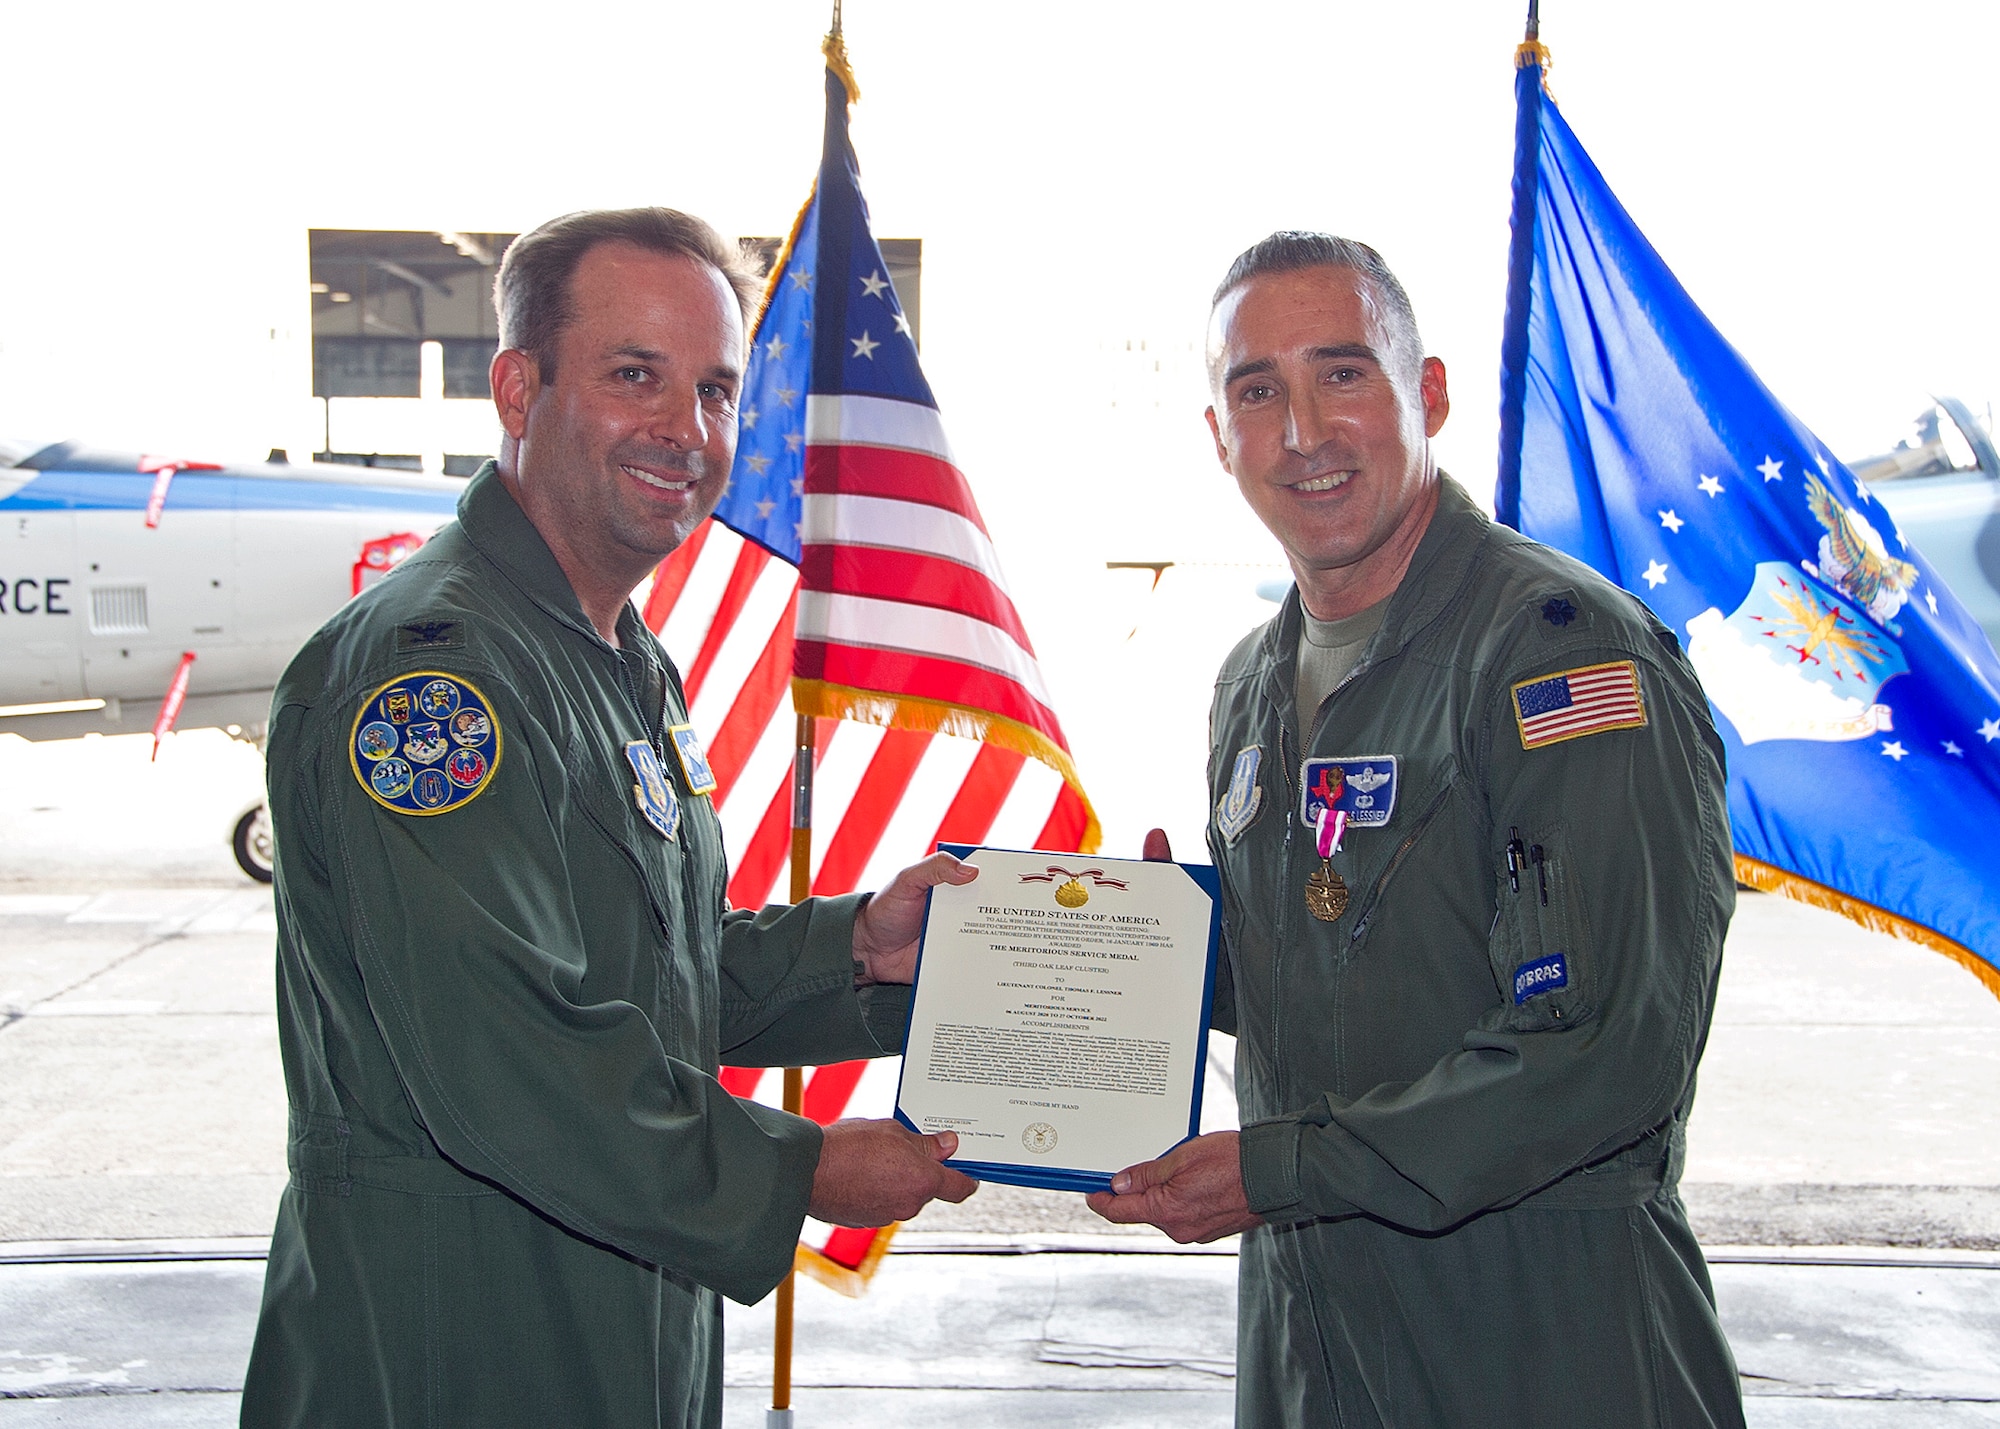 340th FTG commander presents Meritorious Service Medal to Lt. Col. Lessner